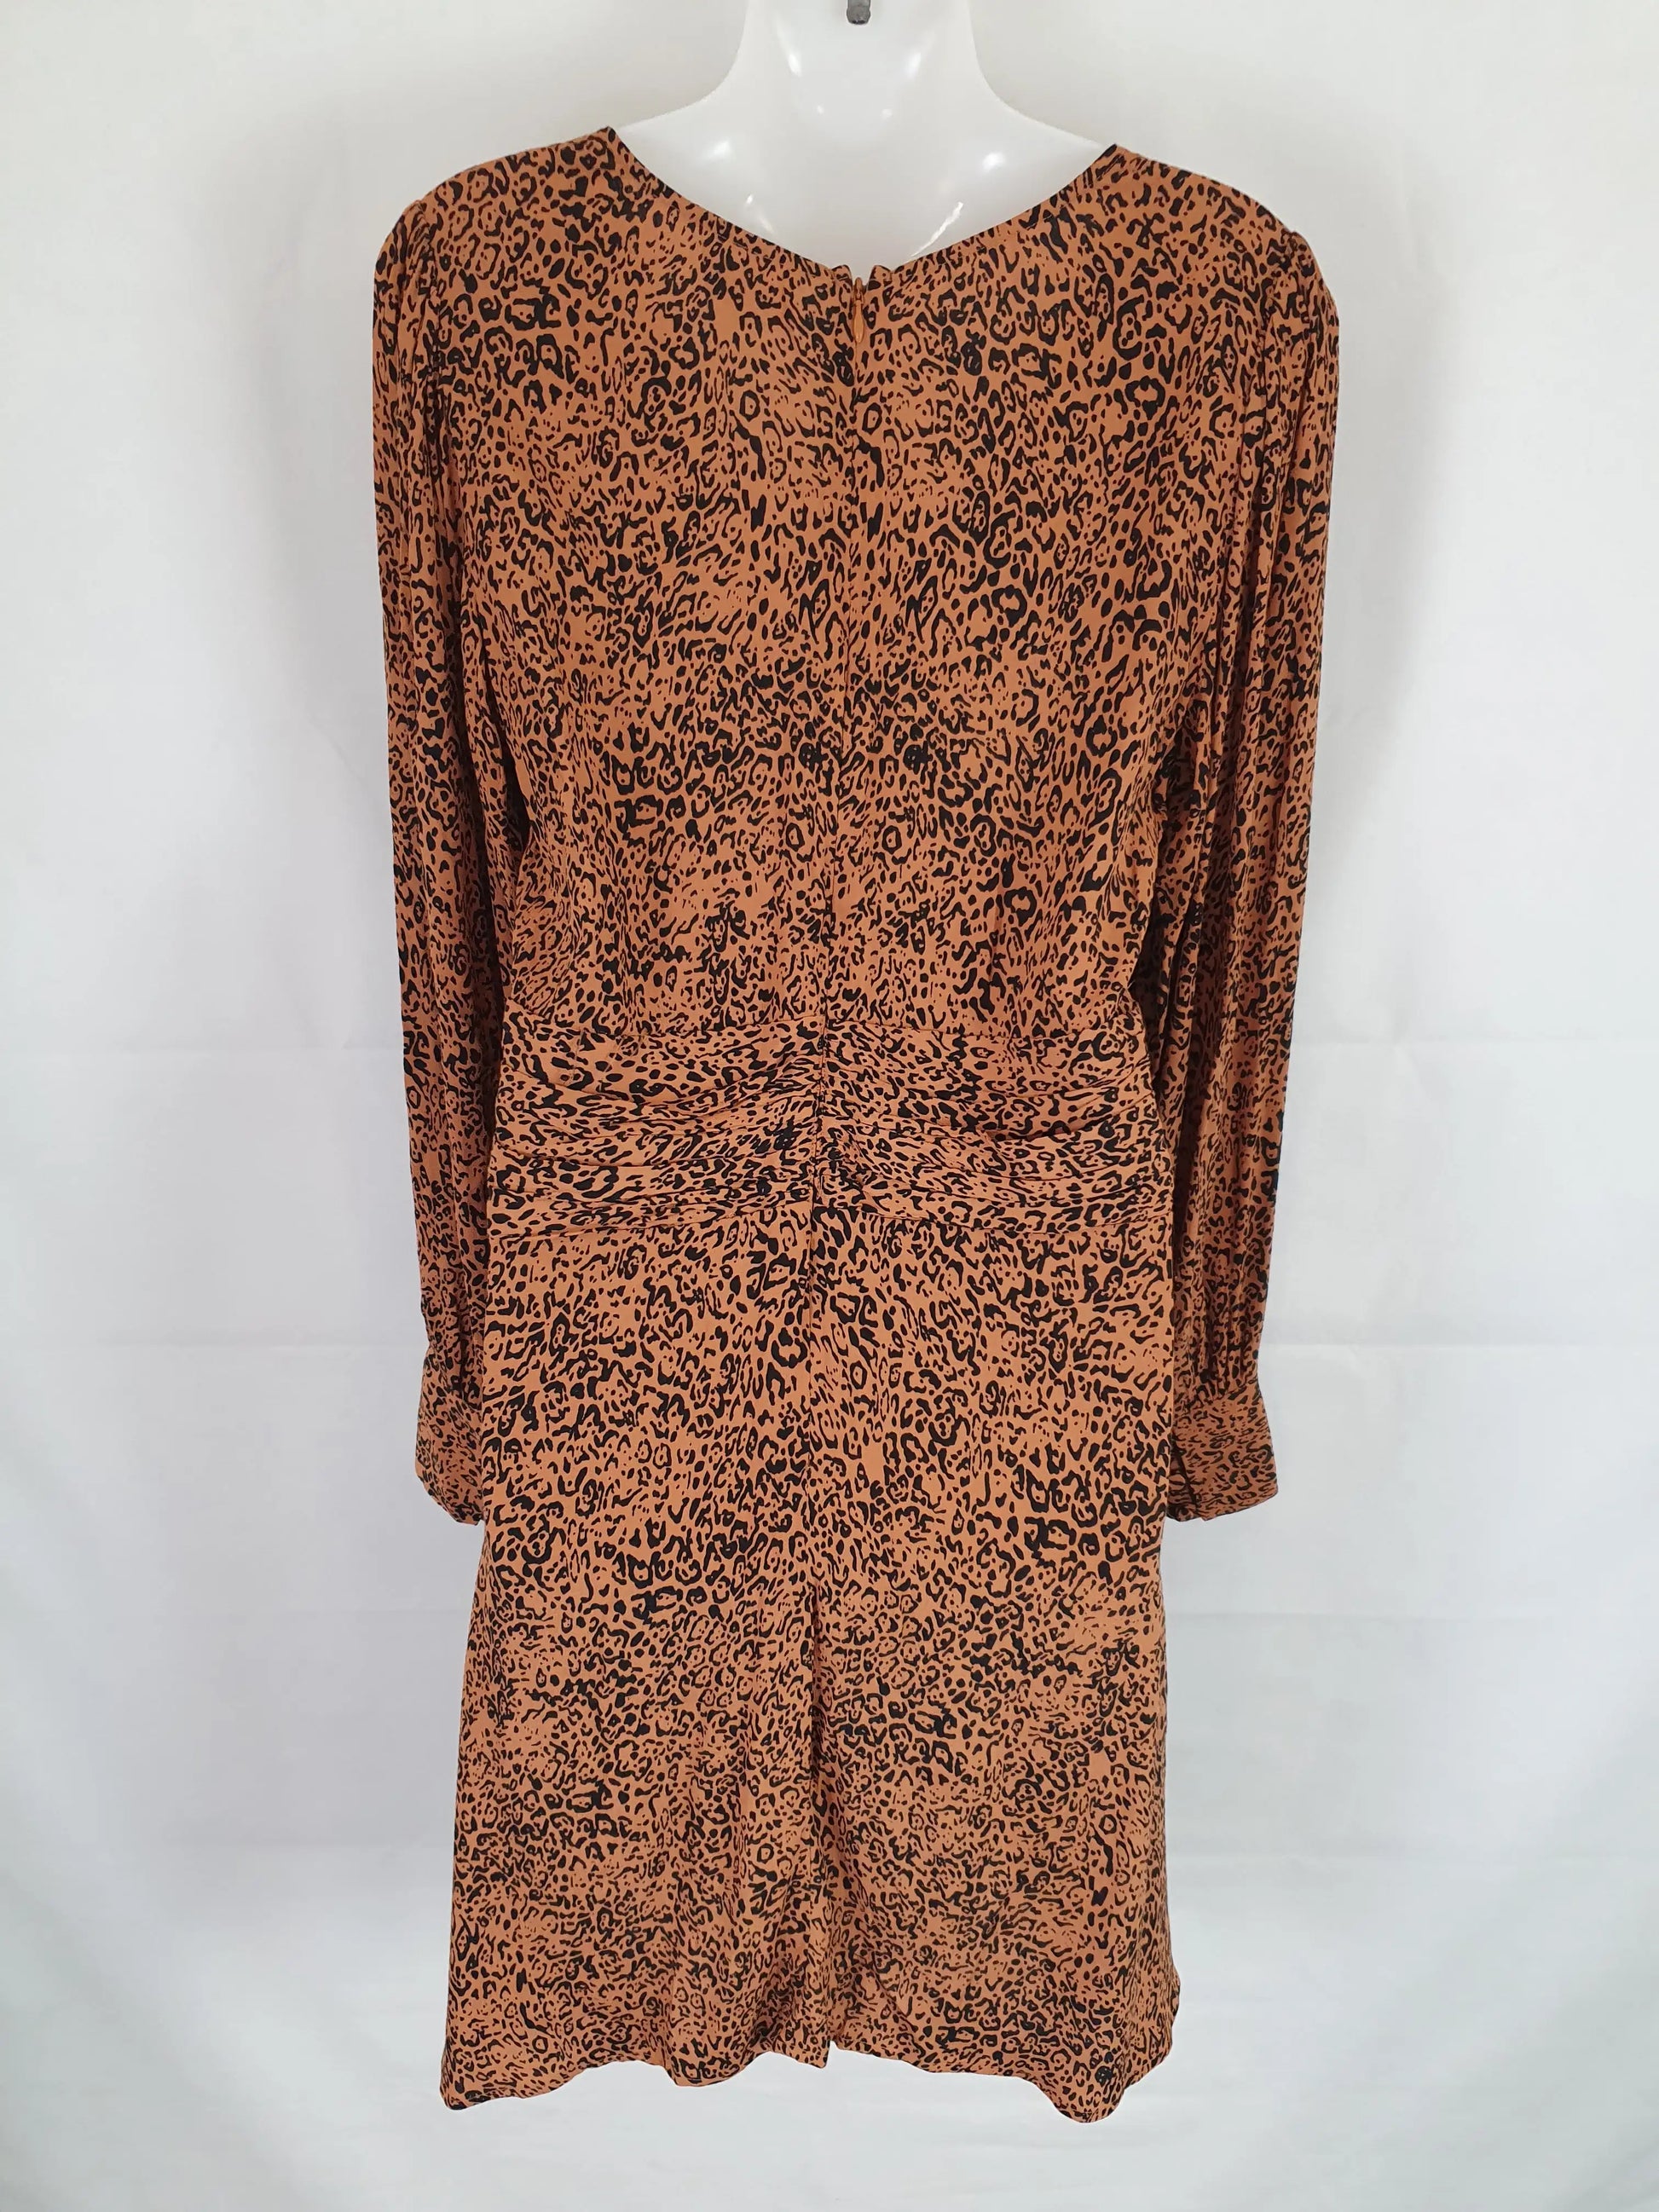 Seed Leopard Print Midi Dress Size 10 by SwapUp-Online Second Hand Store-Online Thrift Store